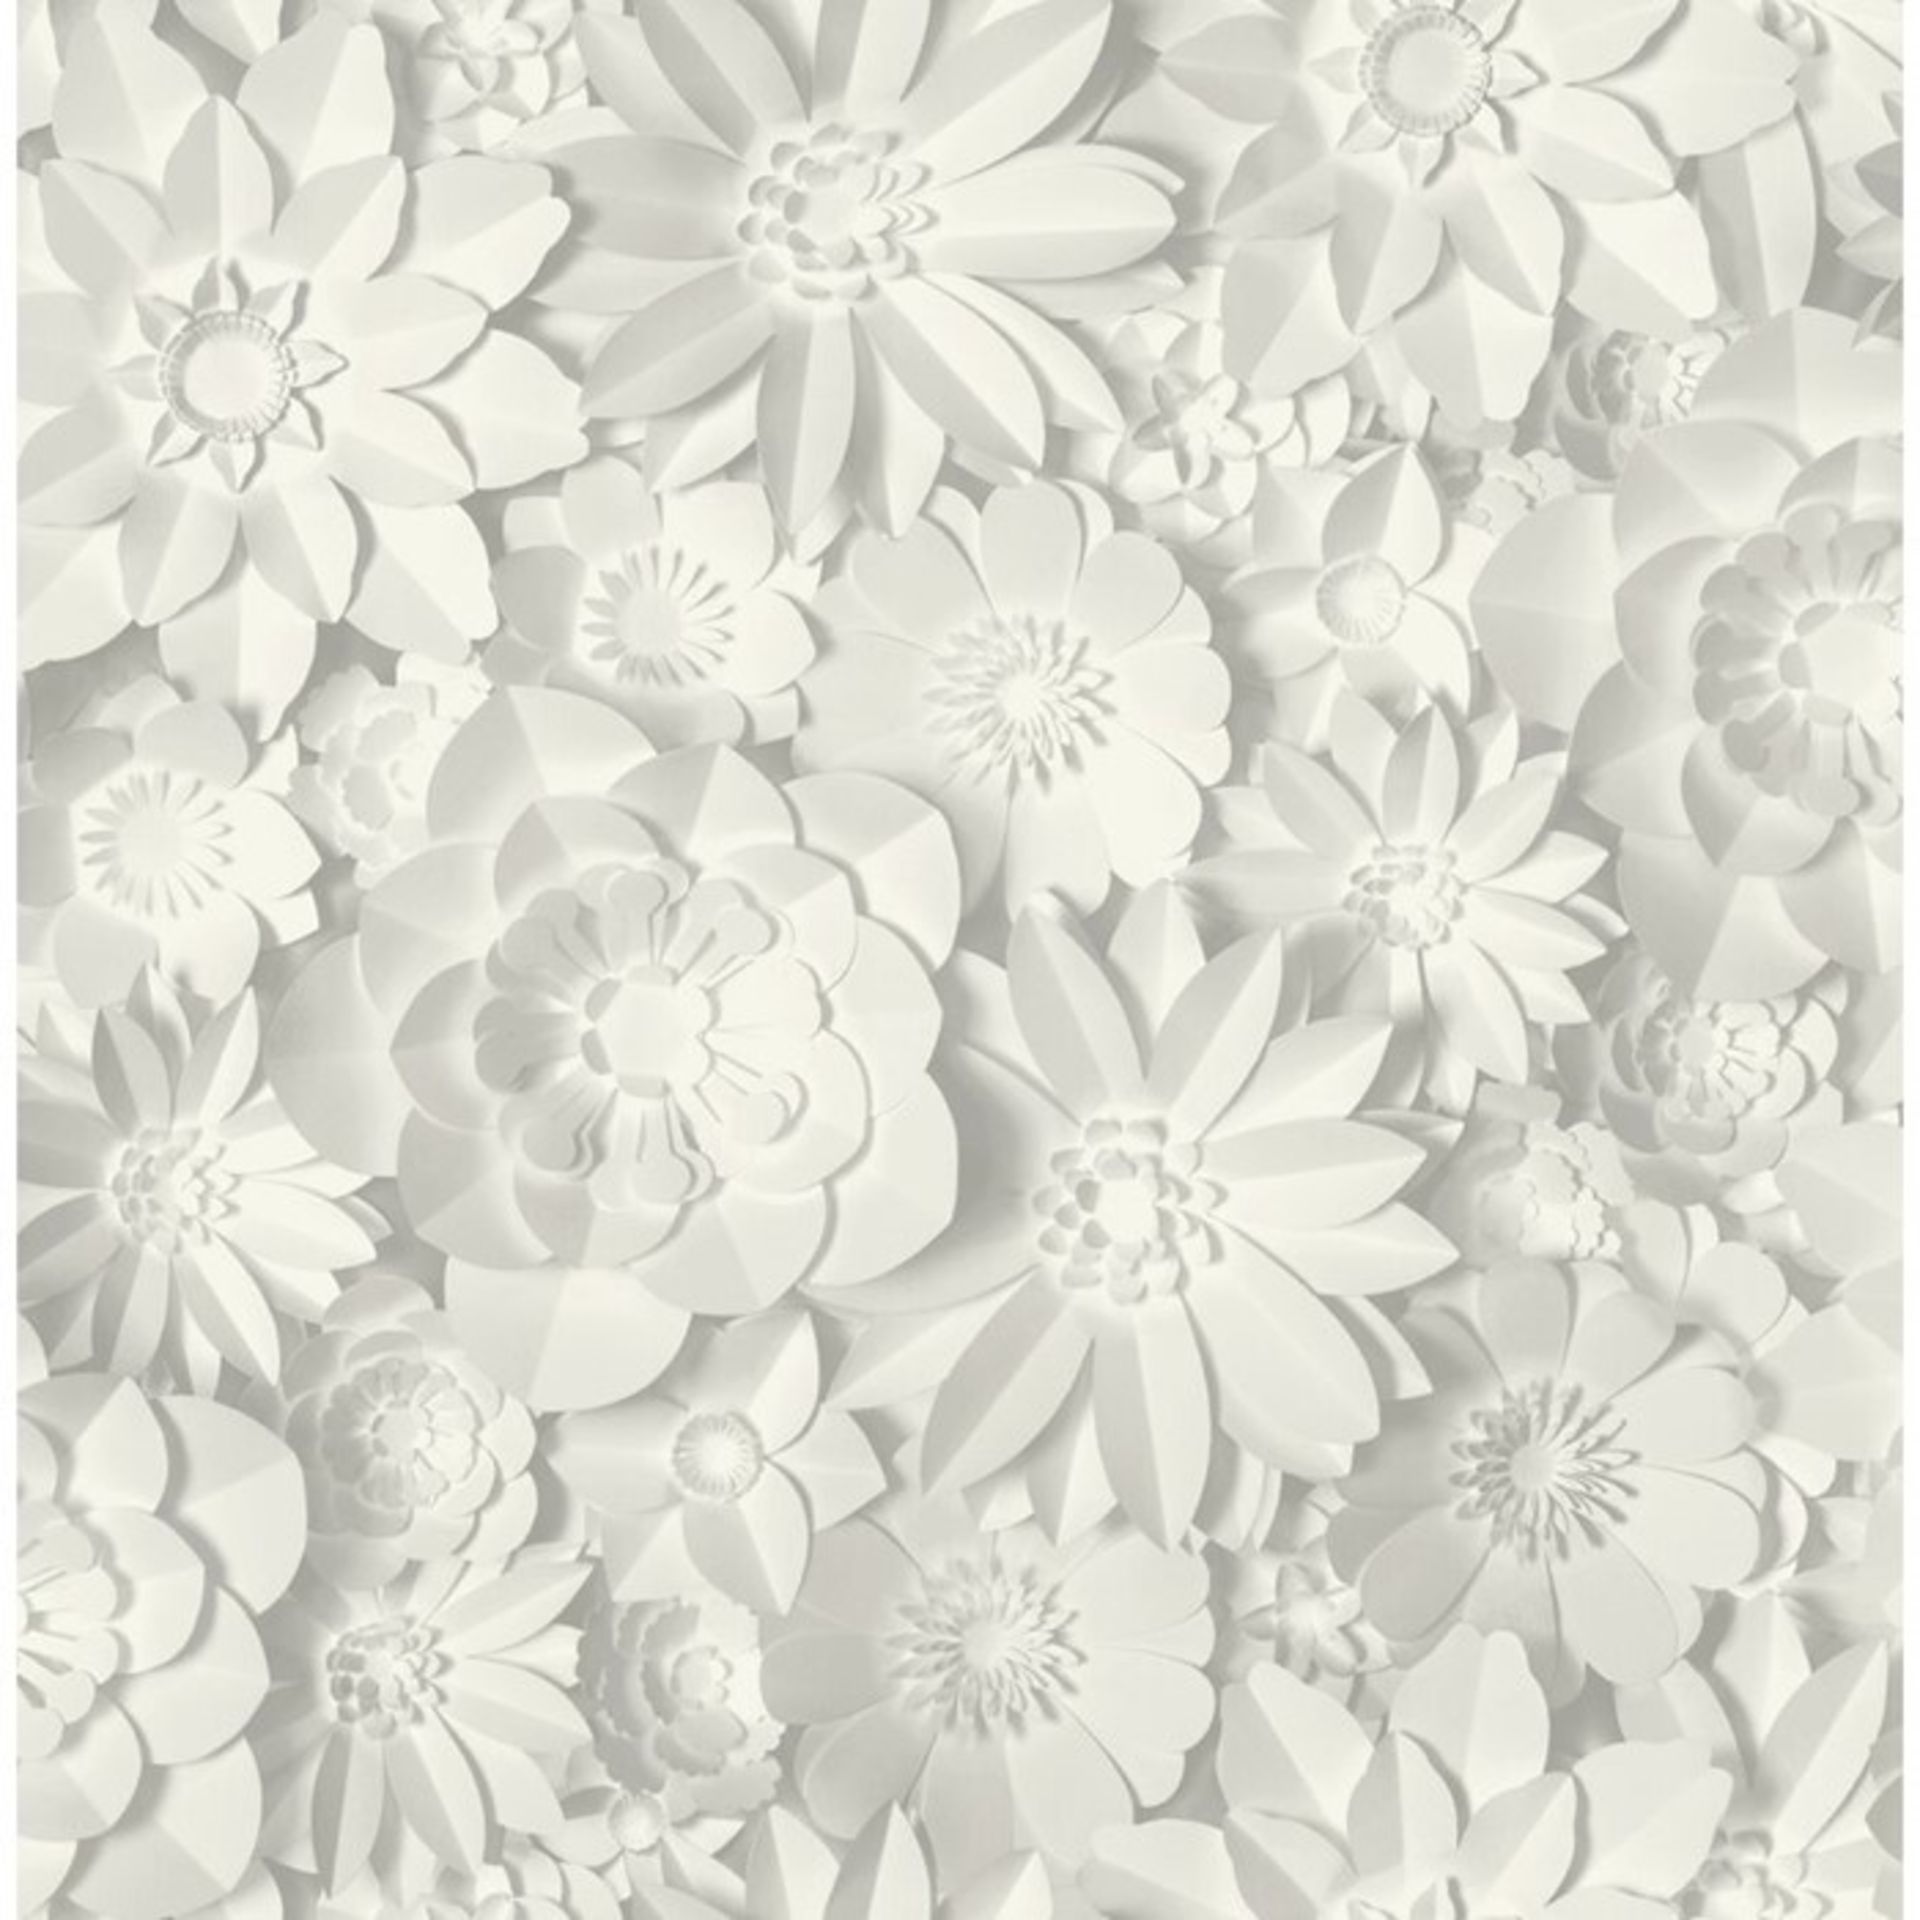 East Urban Home, Dimensions Floral 10.05m x 53cm Wallpaper Roll (X2 ROLLS)(FLORAL WHITE) - RRP £11.